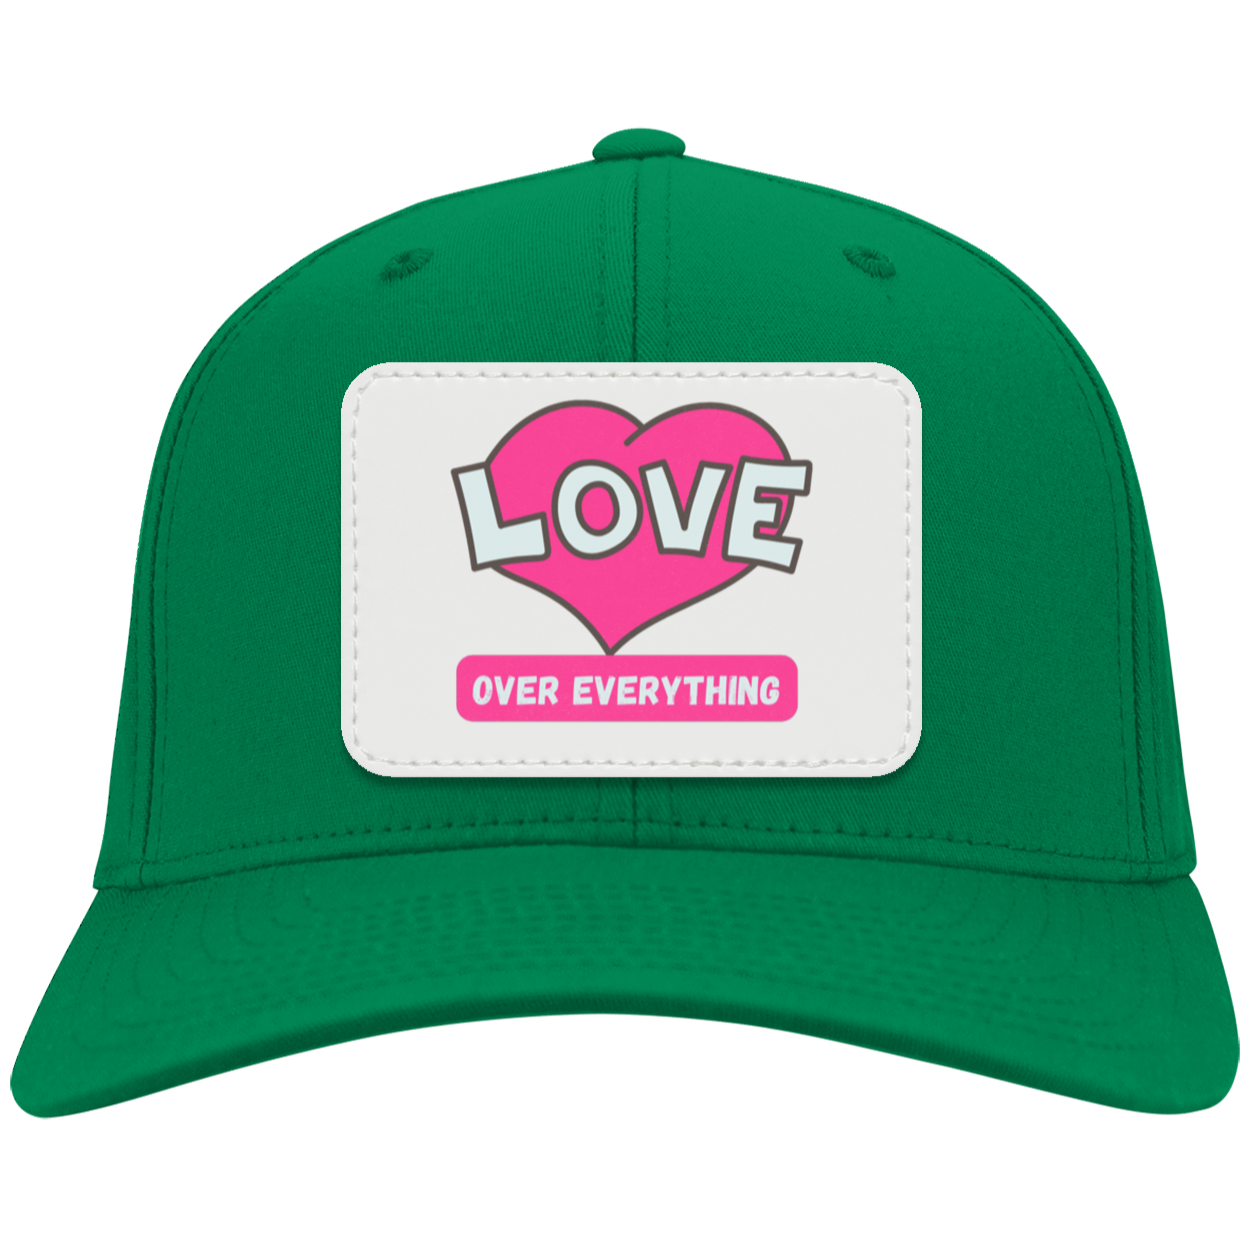 Love over everything  Twill Cap - Patch